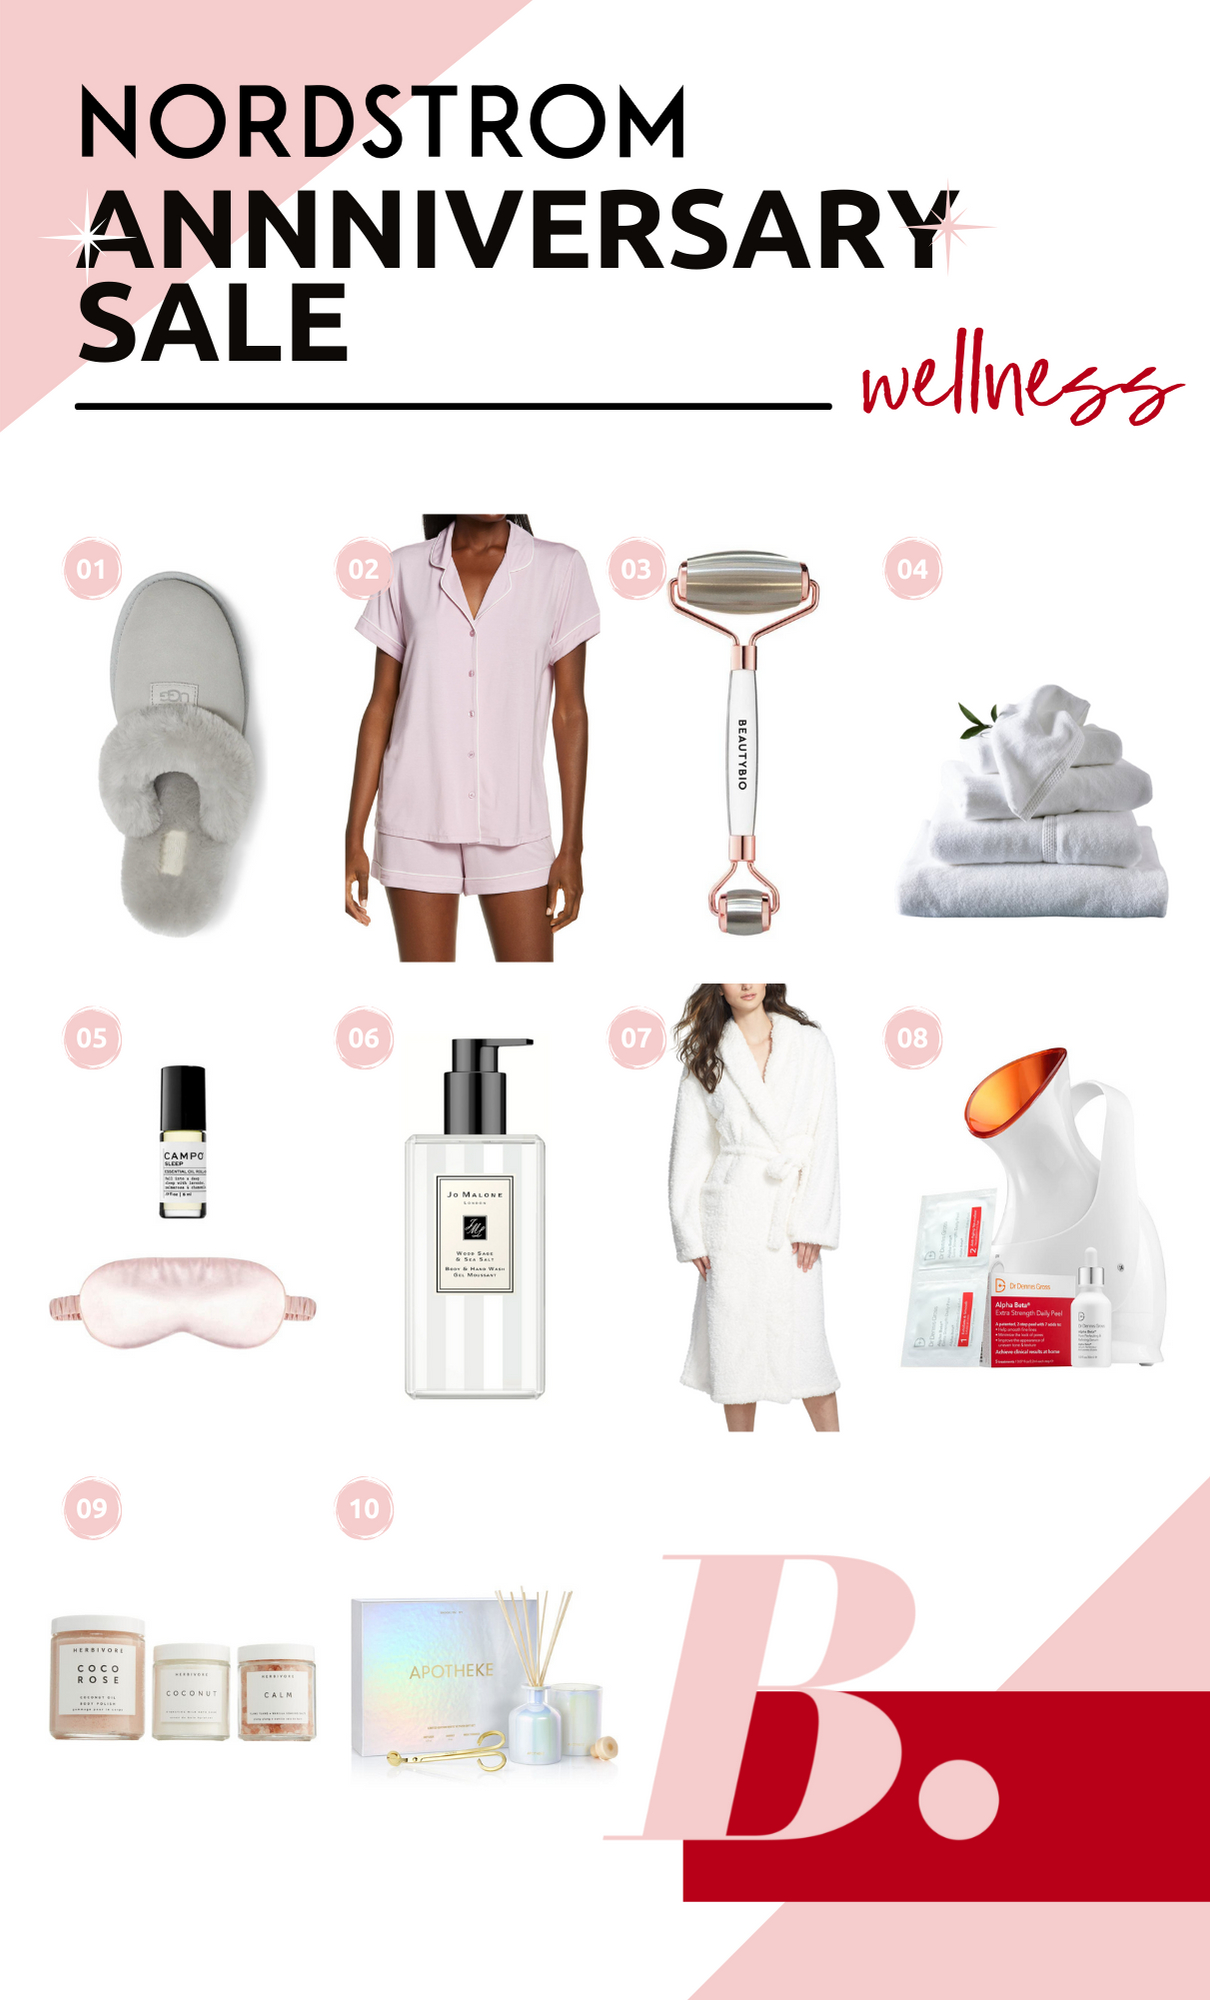 Busbee Nordstrom Anniversary Sale How To Relax At Home, relaxing spa day at home, nordstrom anniversary sale, nsale, best nordstrom sale finds